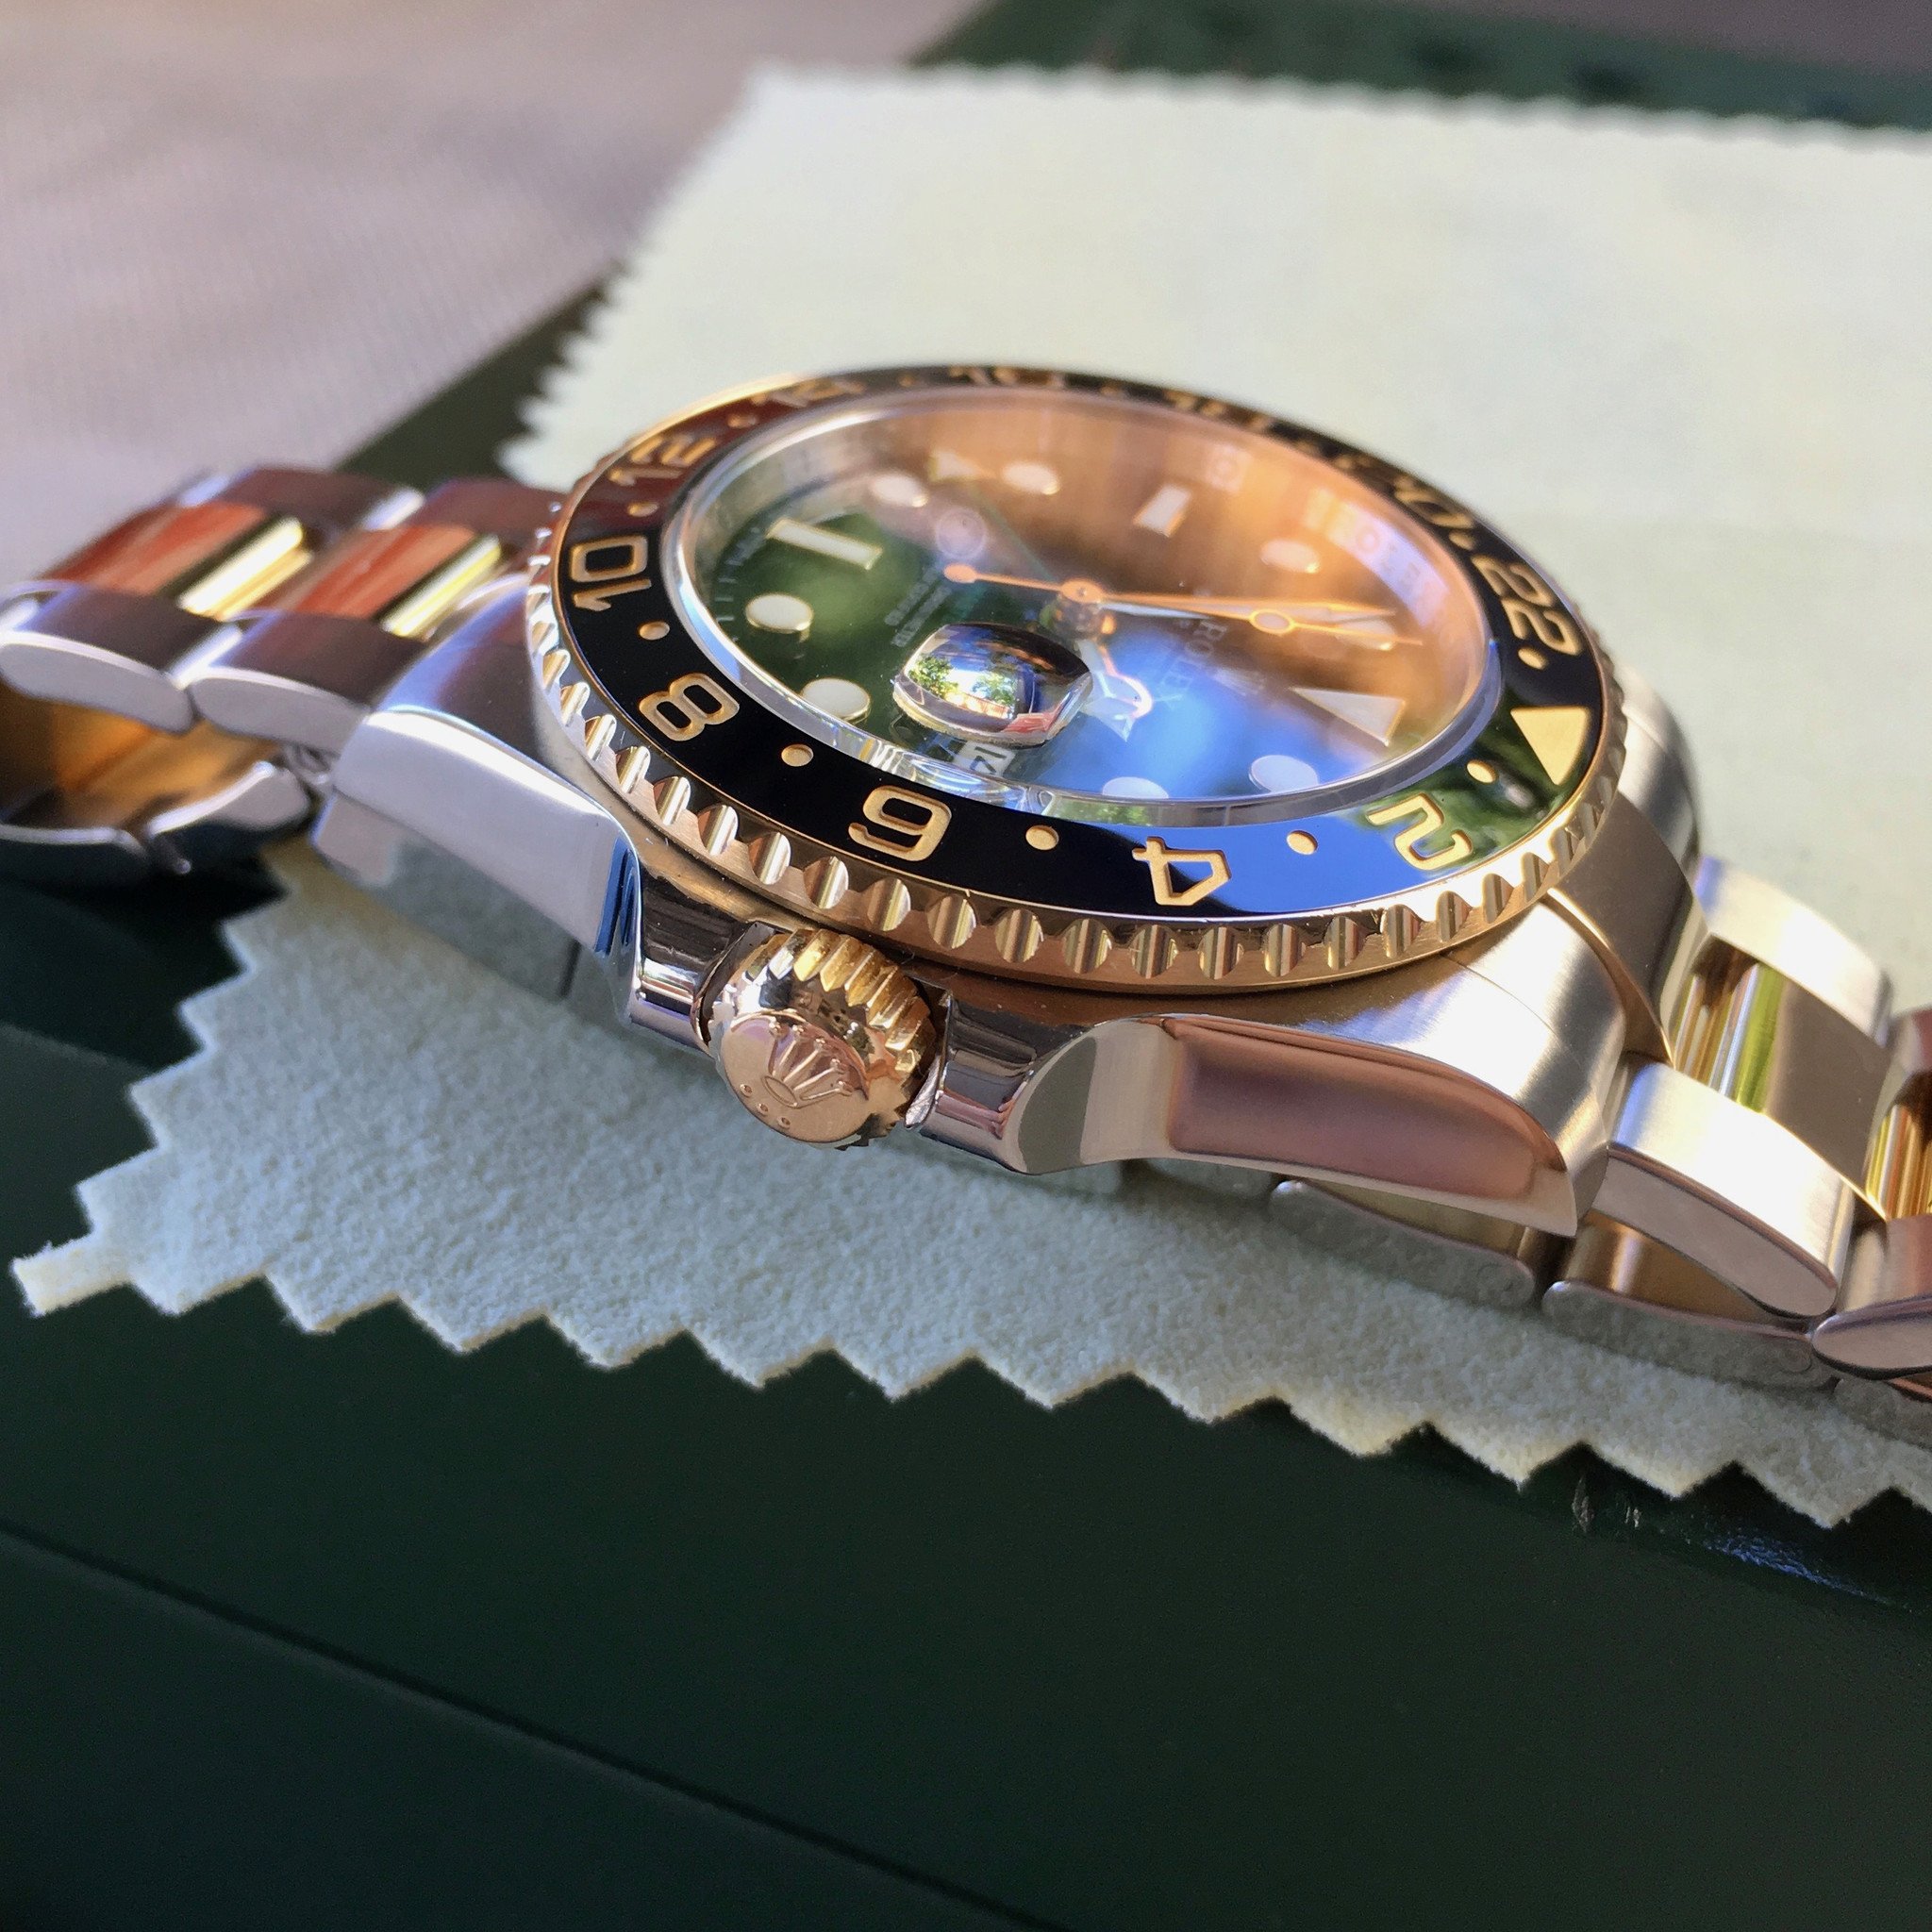 Available ROLEX GMT-MASTER II 116713 WATCH